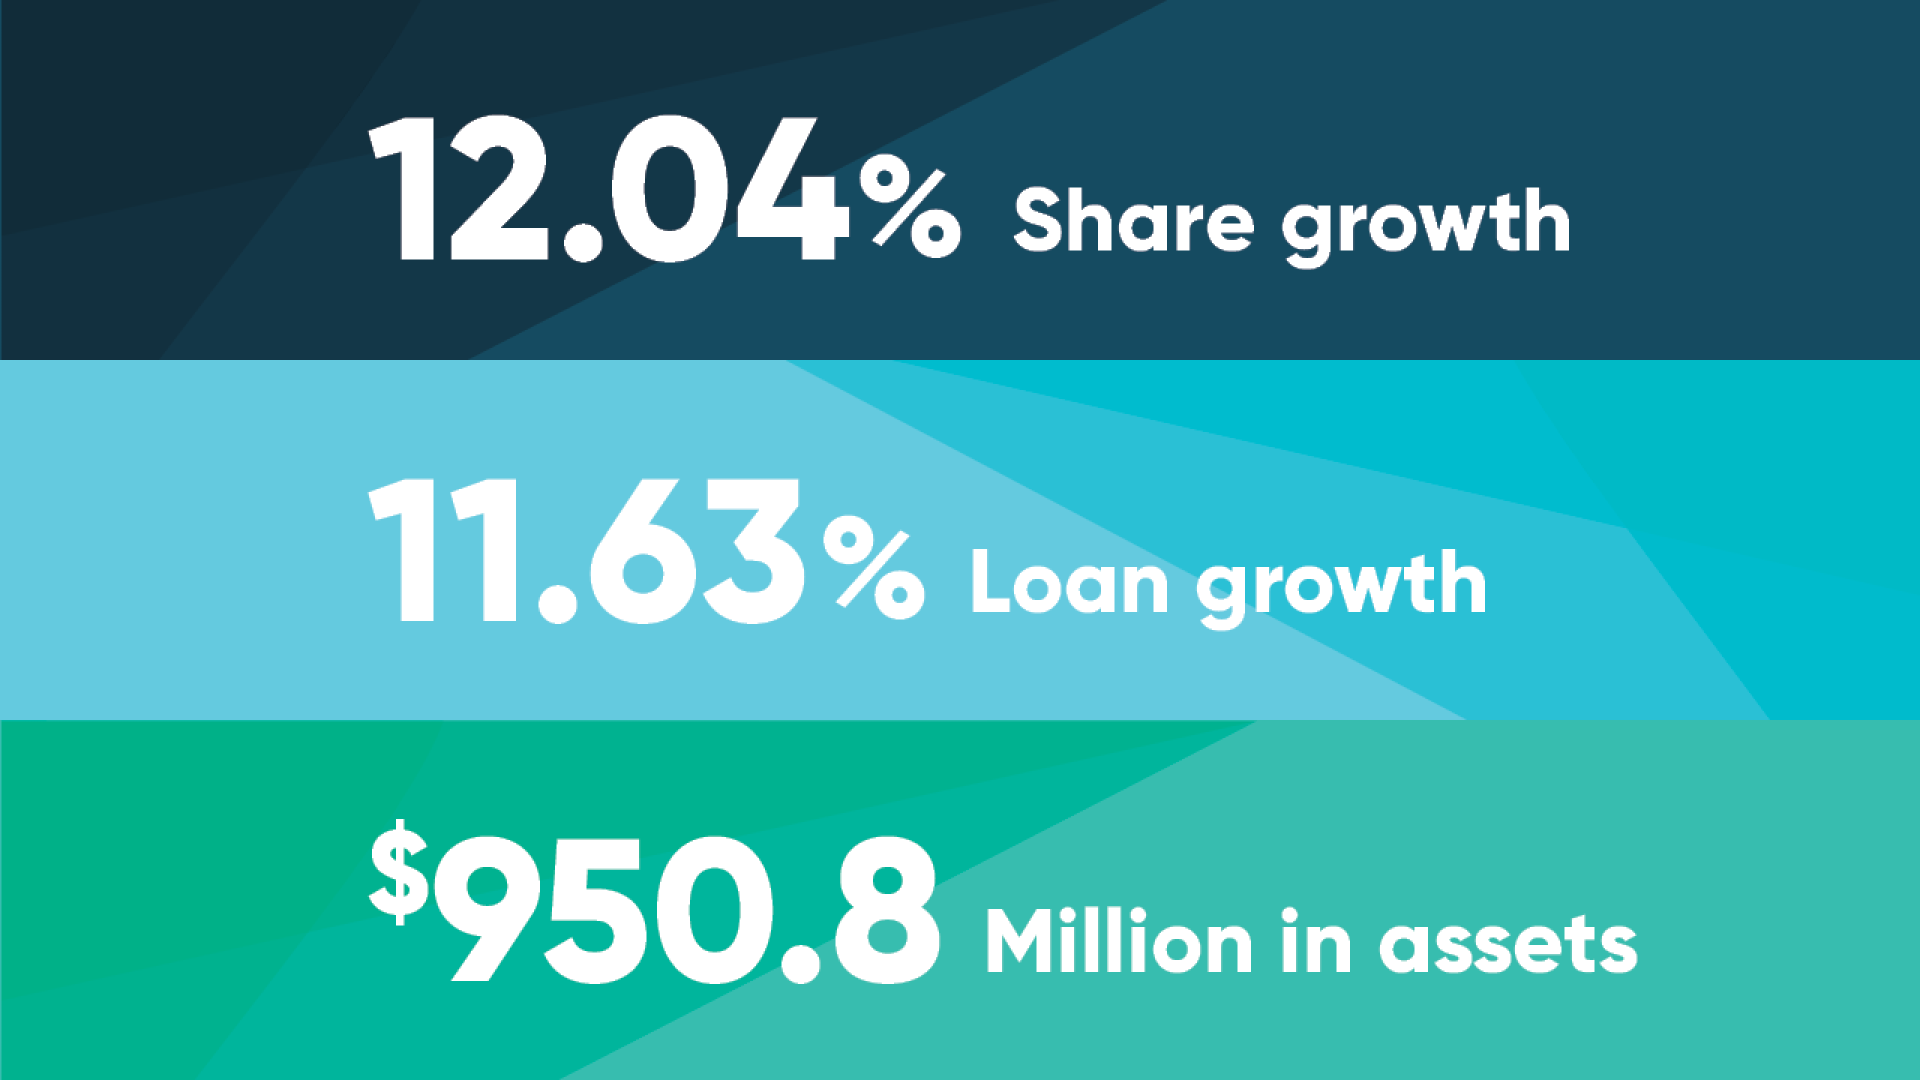 12.04% share growth, 11.63% loan growth, and $950.8 million in assets